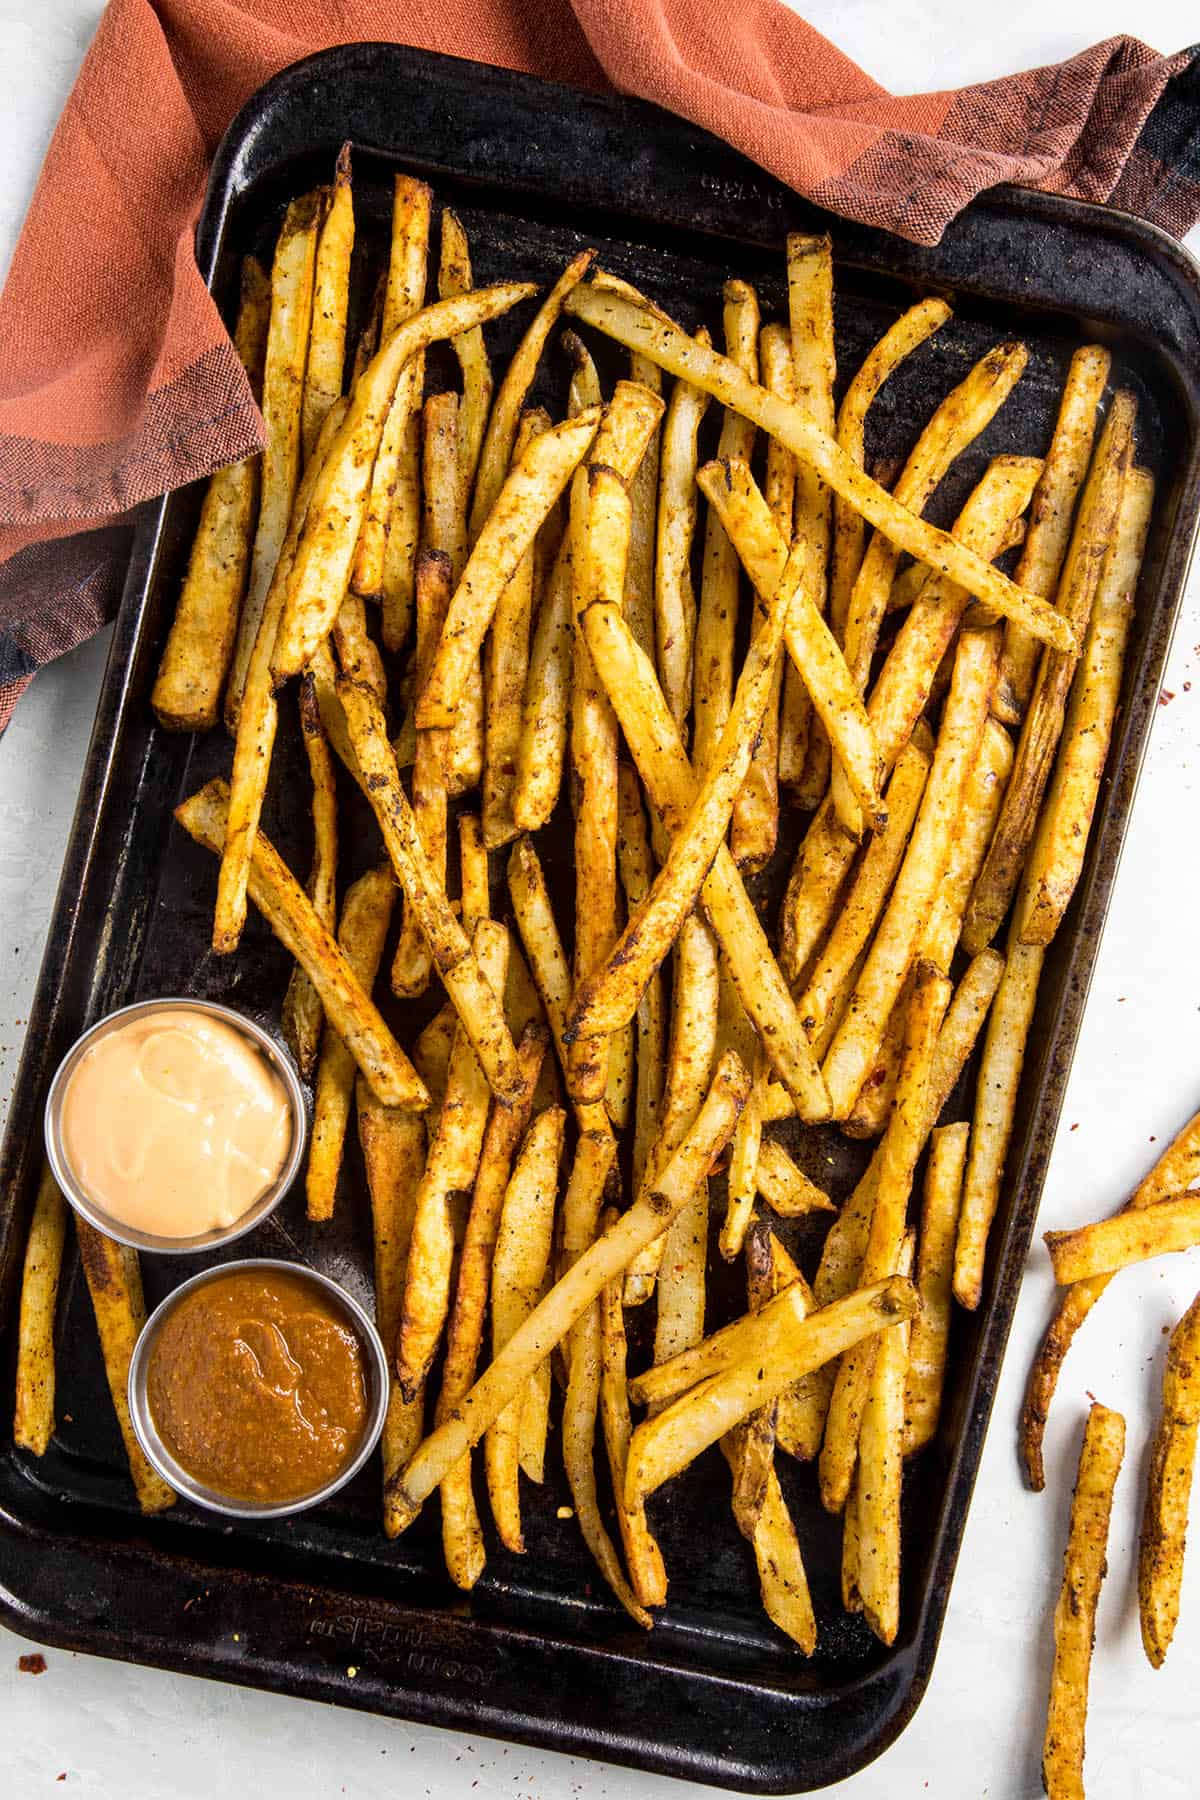 Baked Cajun Fries, just out of the oven